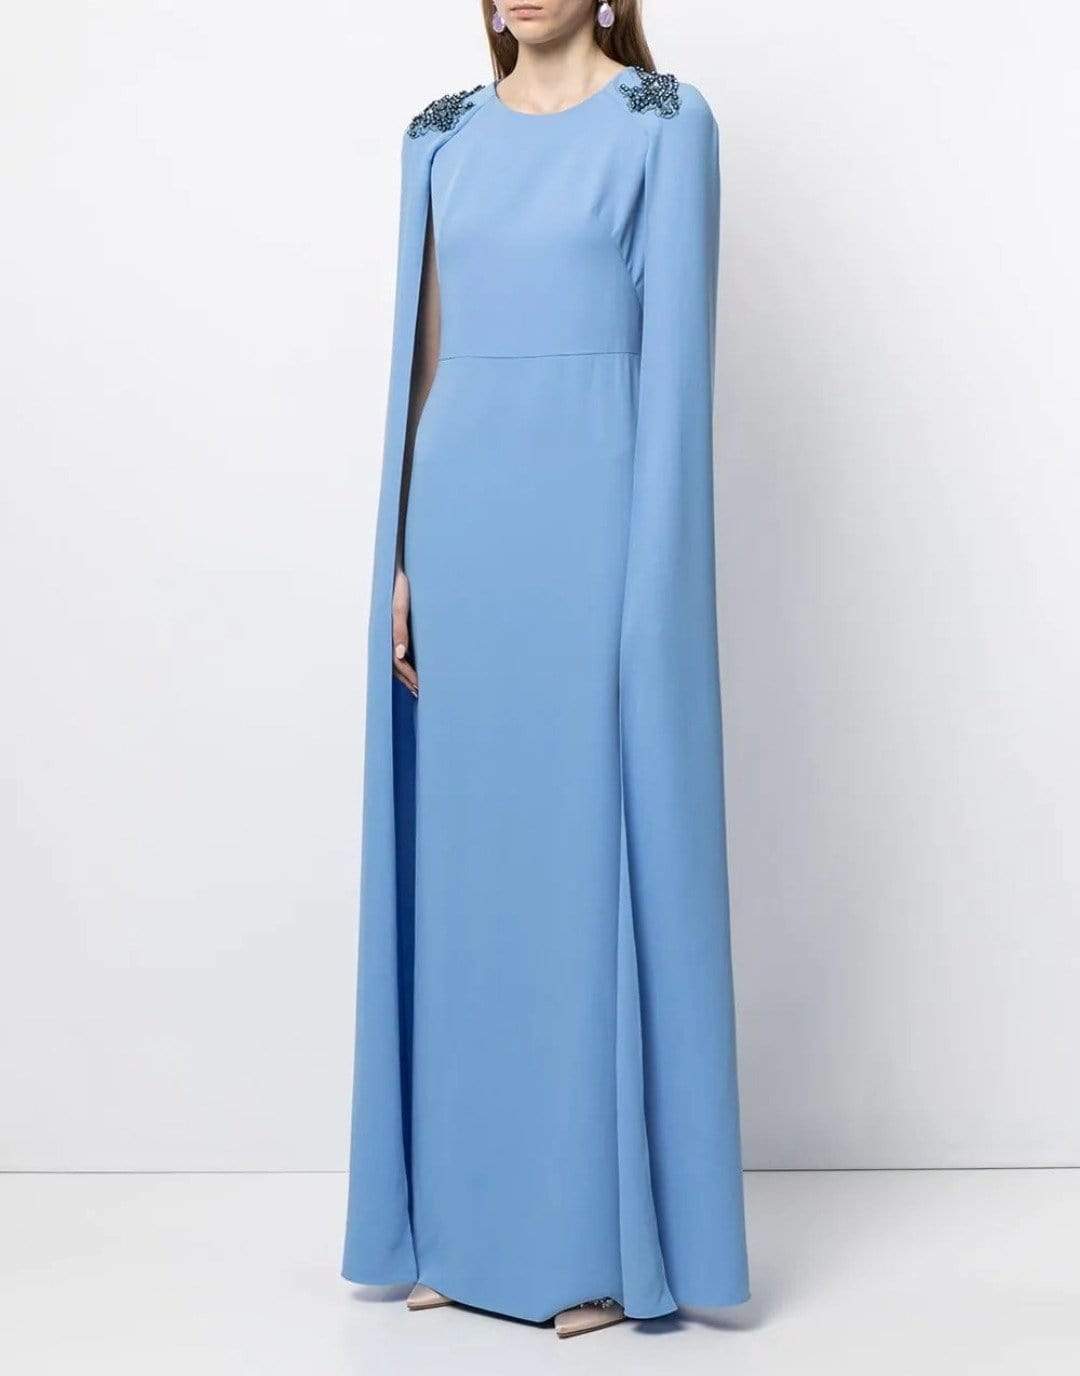 MARCHESA NOTTE-Dusty Blue Embroidered Cape Dress-